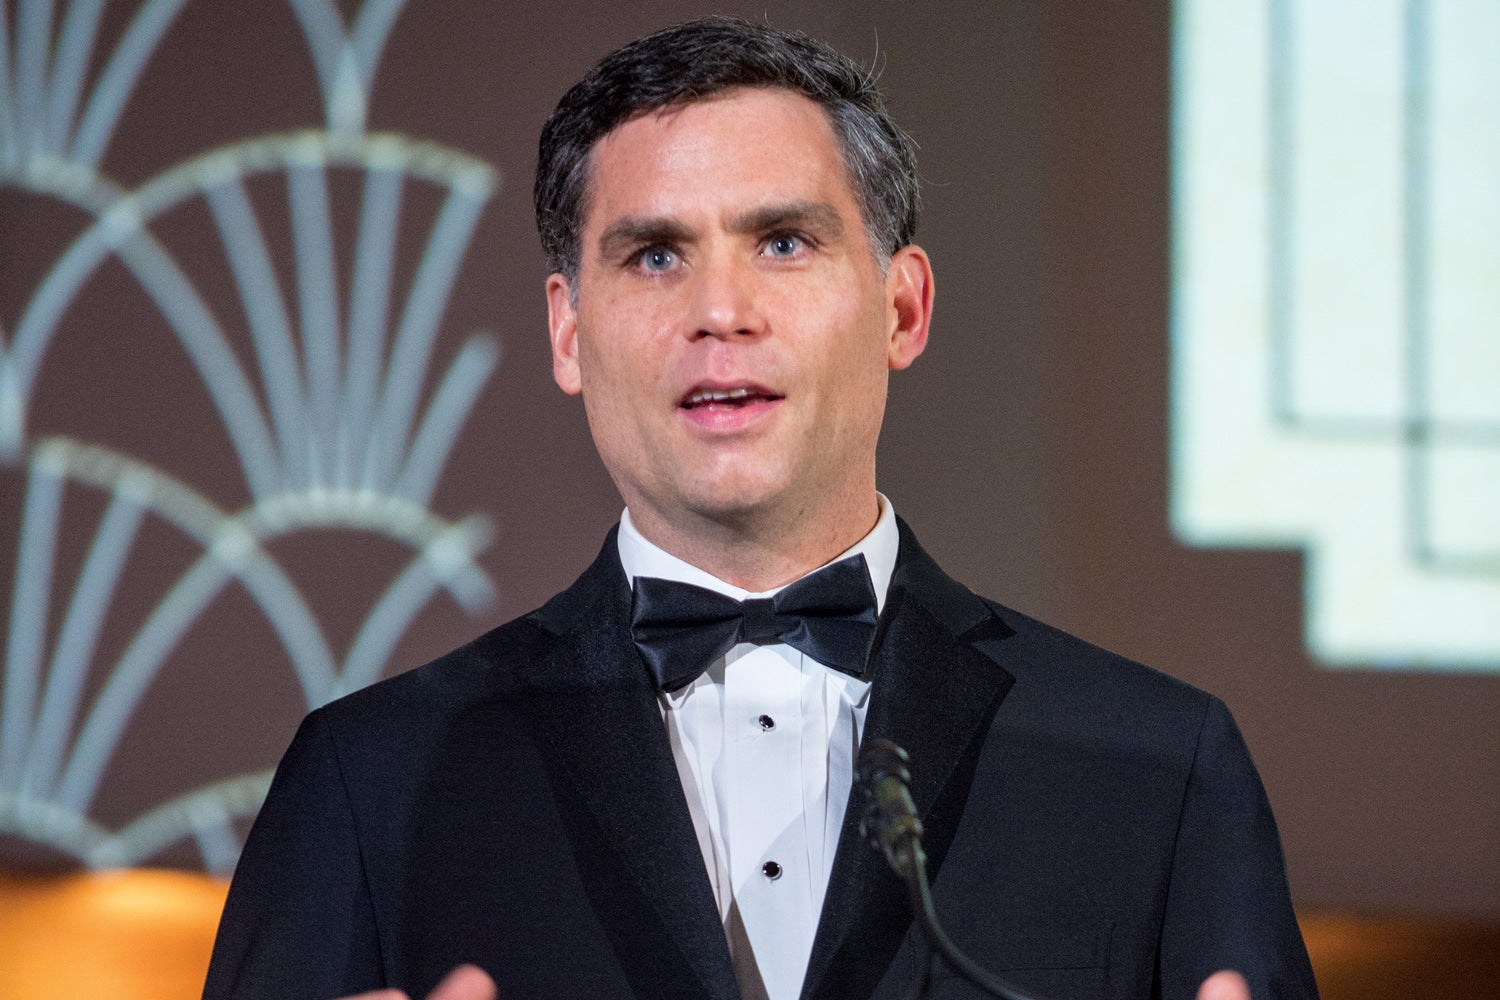 Pediatrics chair Michael Donnelly, MD, speaks at the Georgetown Pediatrics Gala in April 2019. Photo: Leslie E. Kossoff